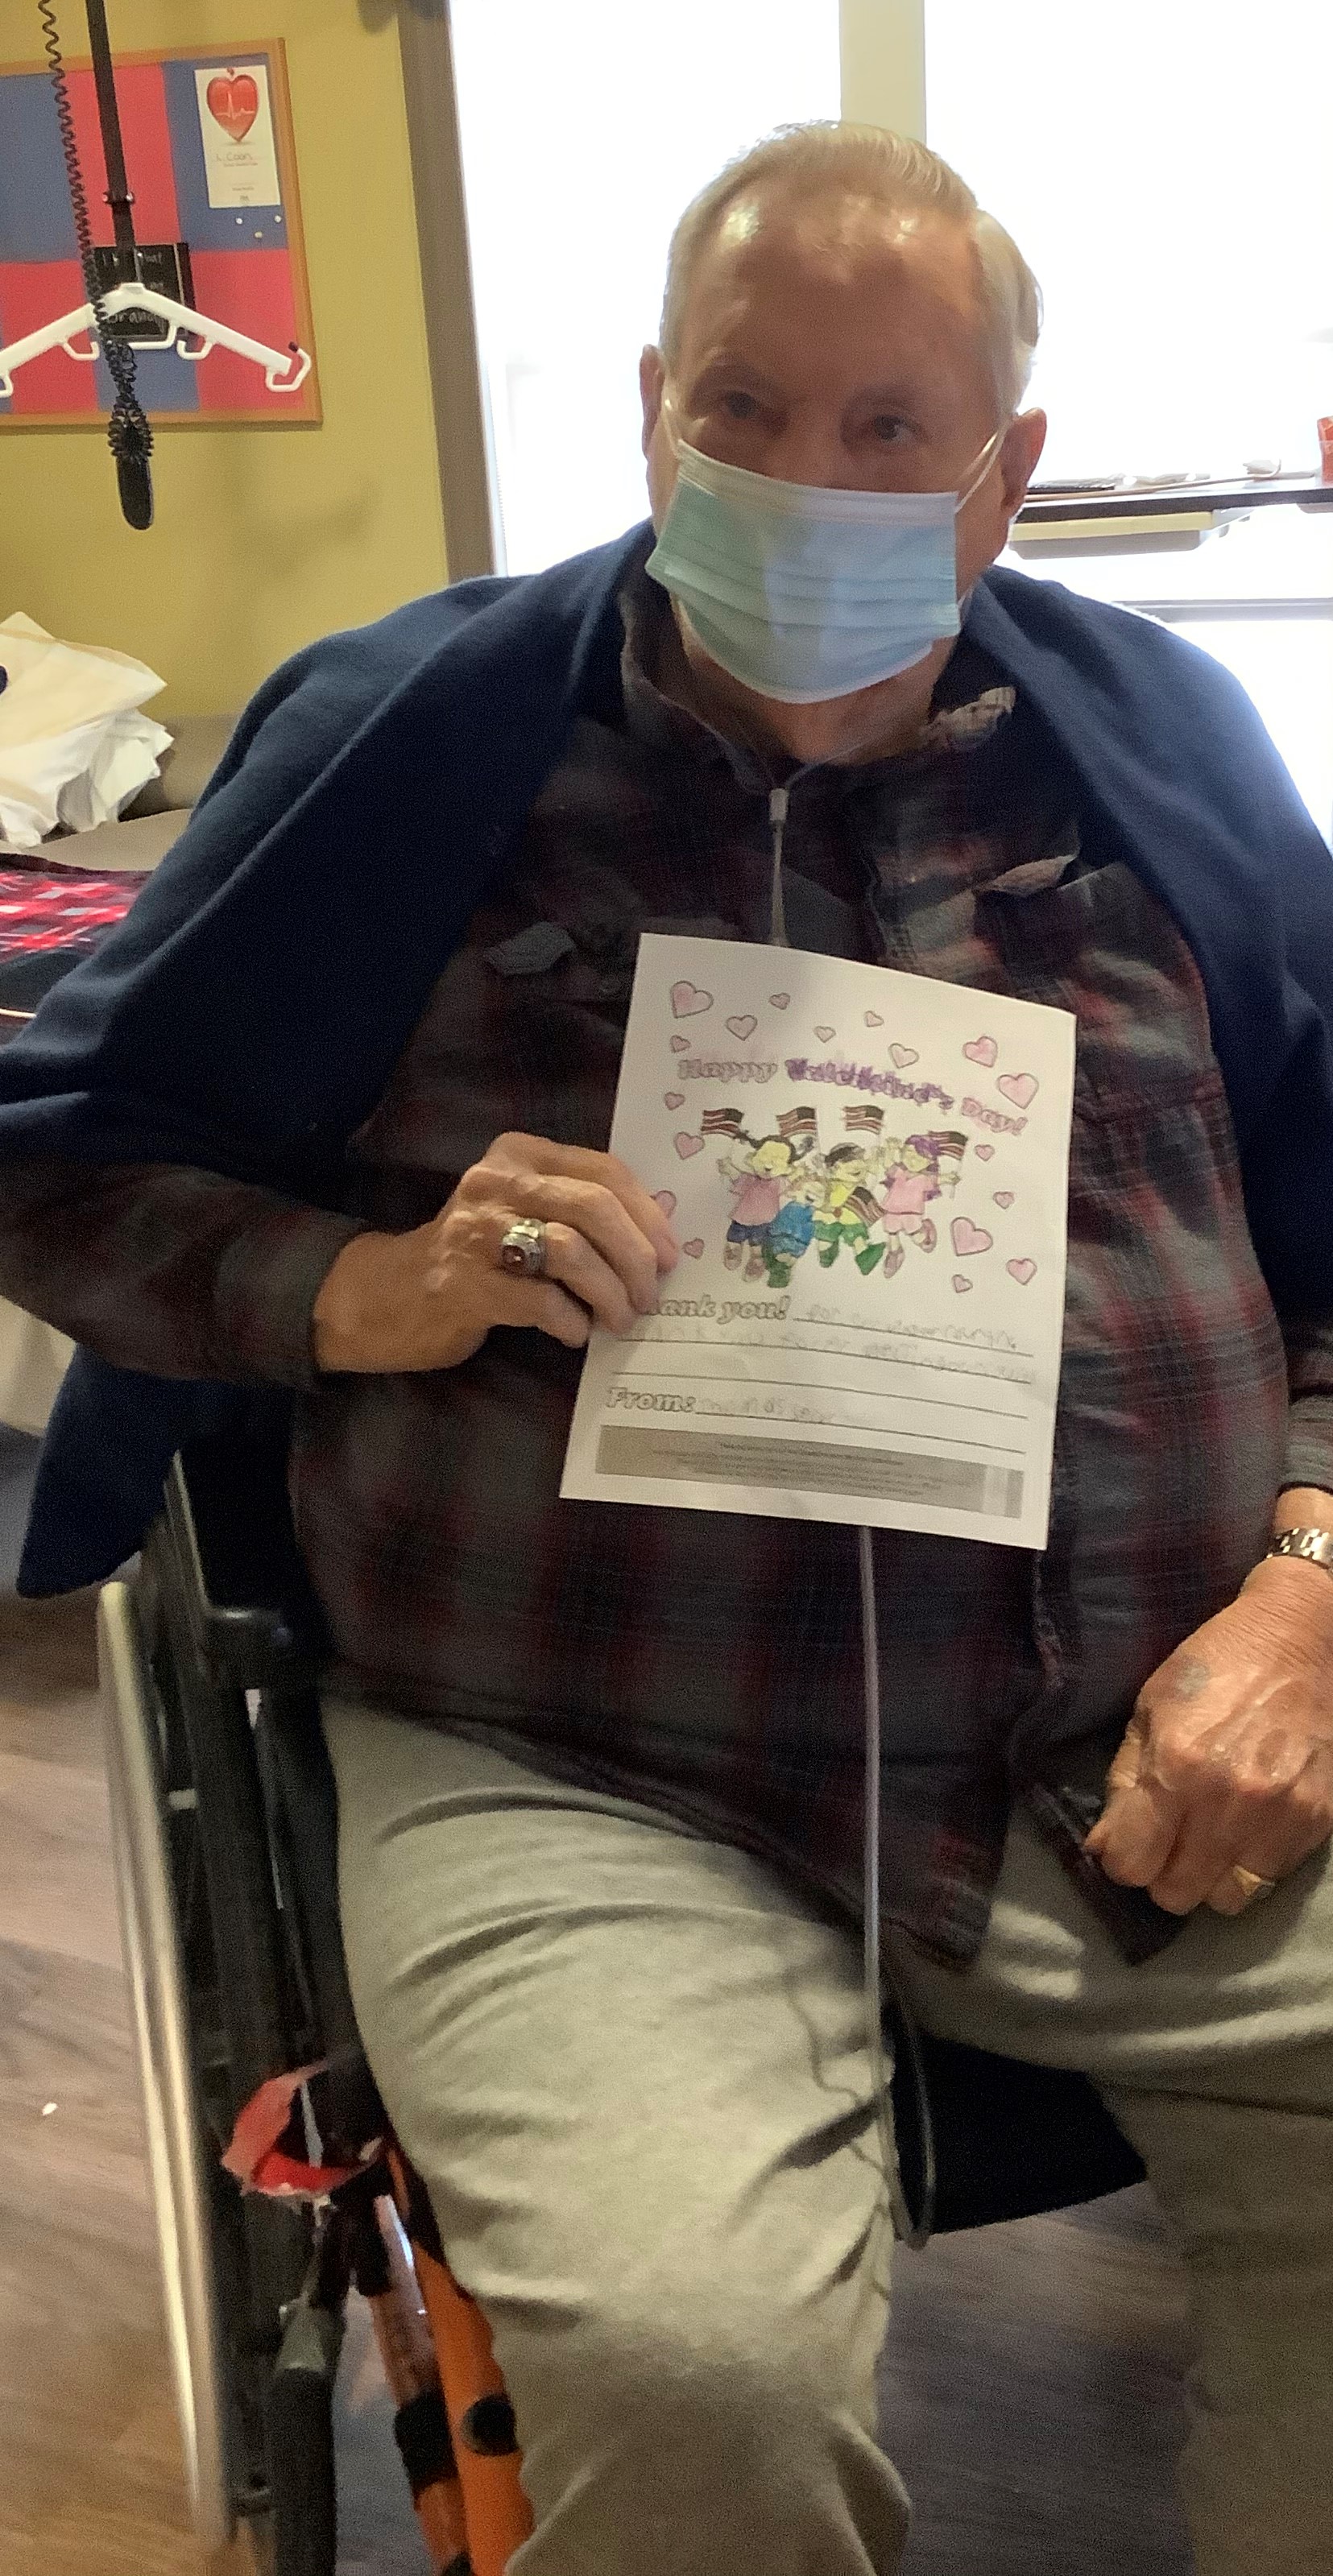 A Veteran admiring his Valentine’s Day Card thanks to Assemblywoman Buttenschon's Valentines for Vets.